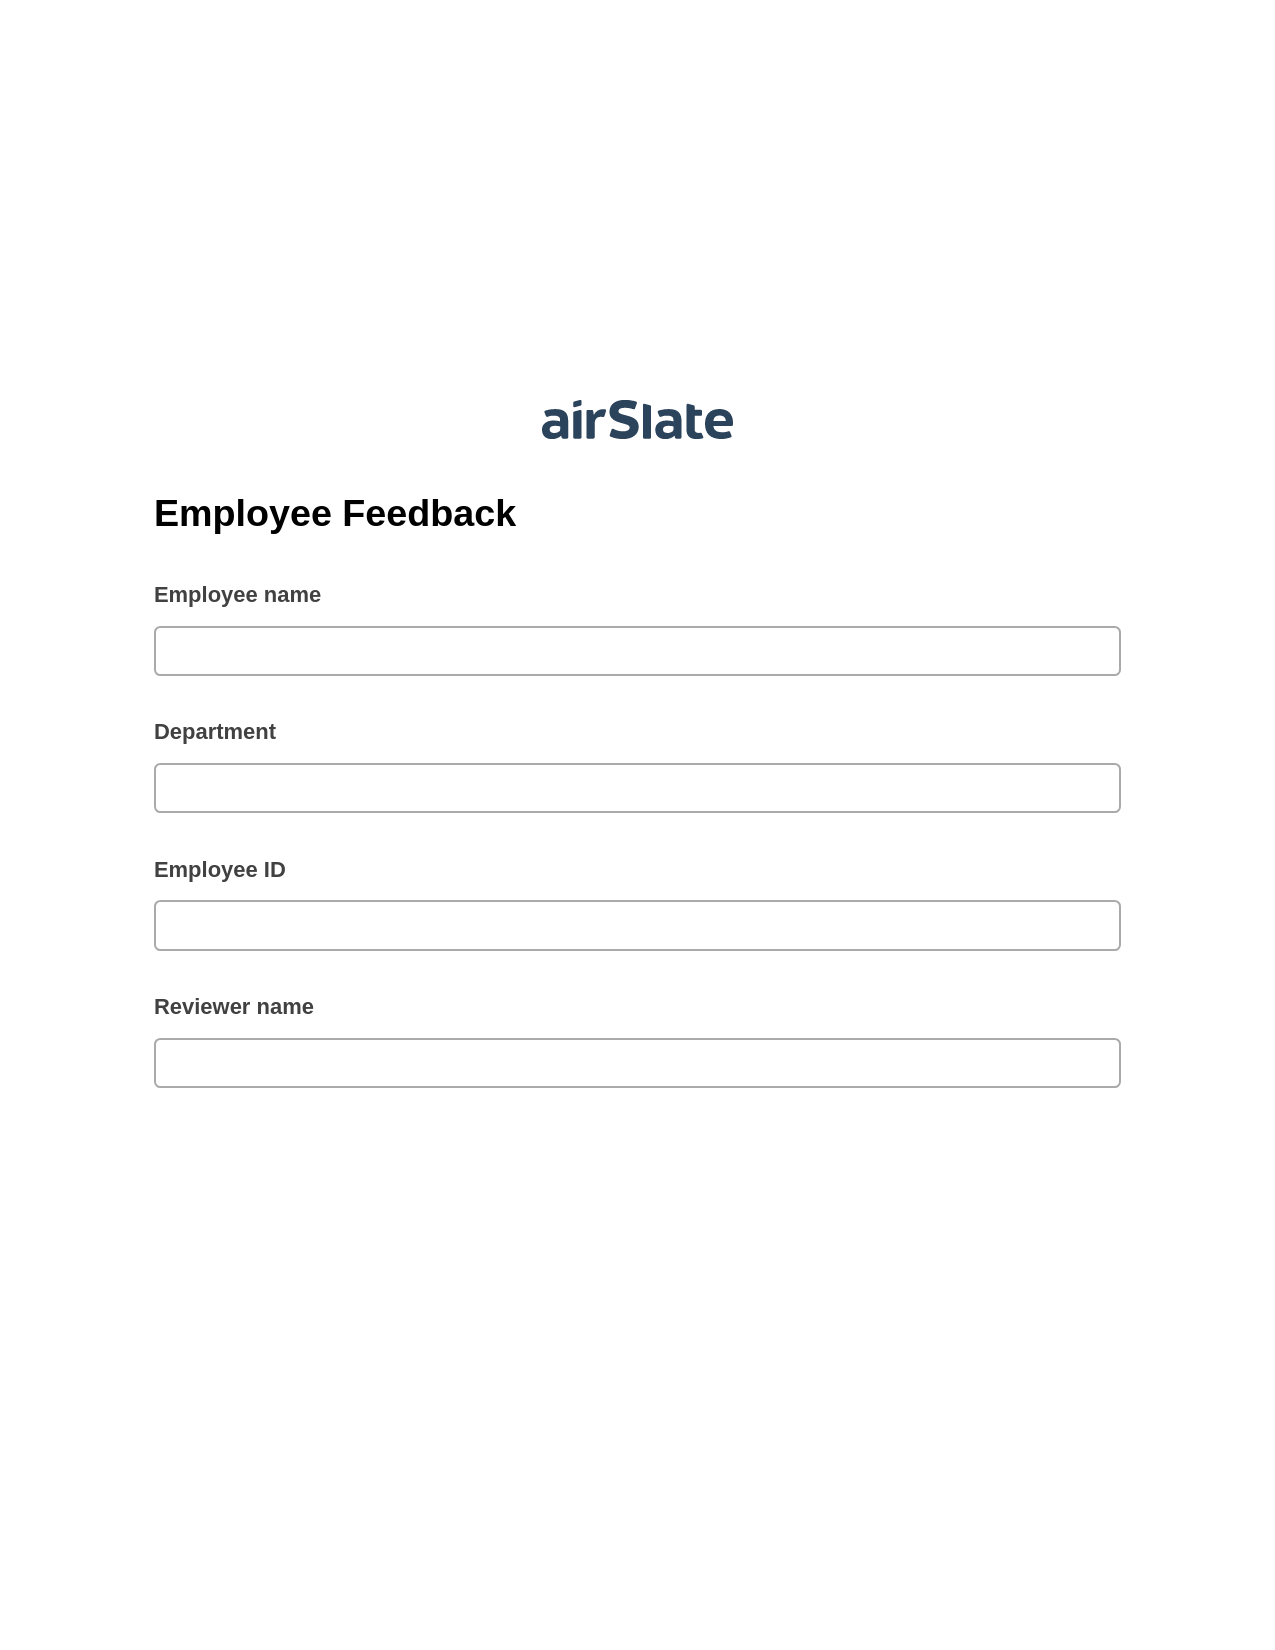 Multirole Employee Feedback Pre-fill from Google Sheet Dropdown Options Bot, Add Tags to Slate Bot, Export to Excel 365 Bot